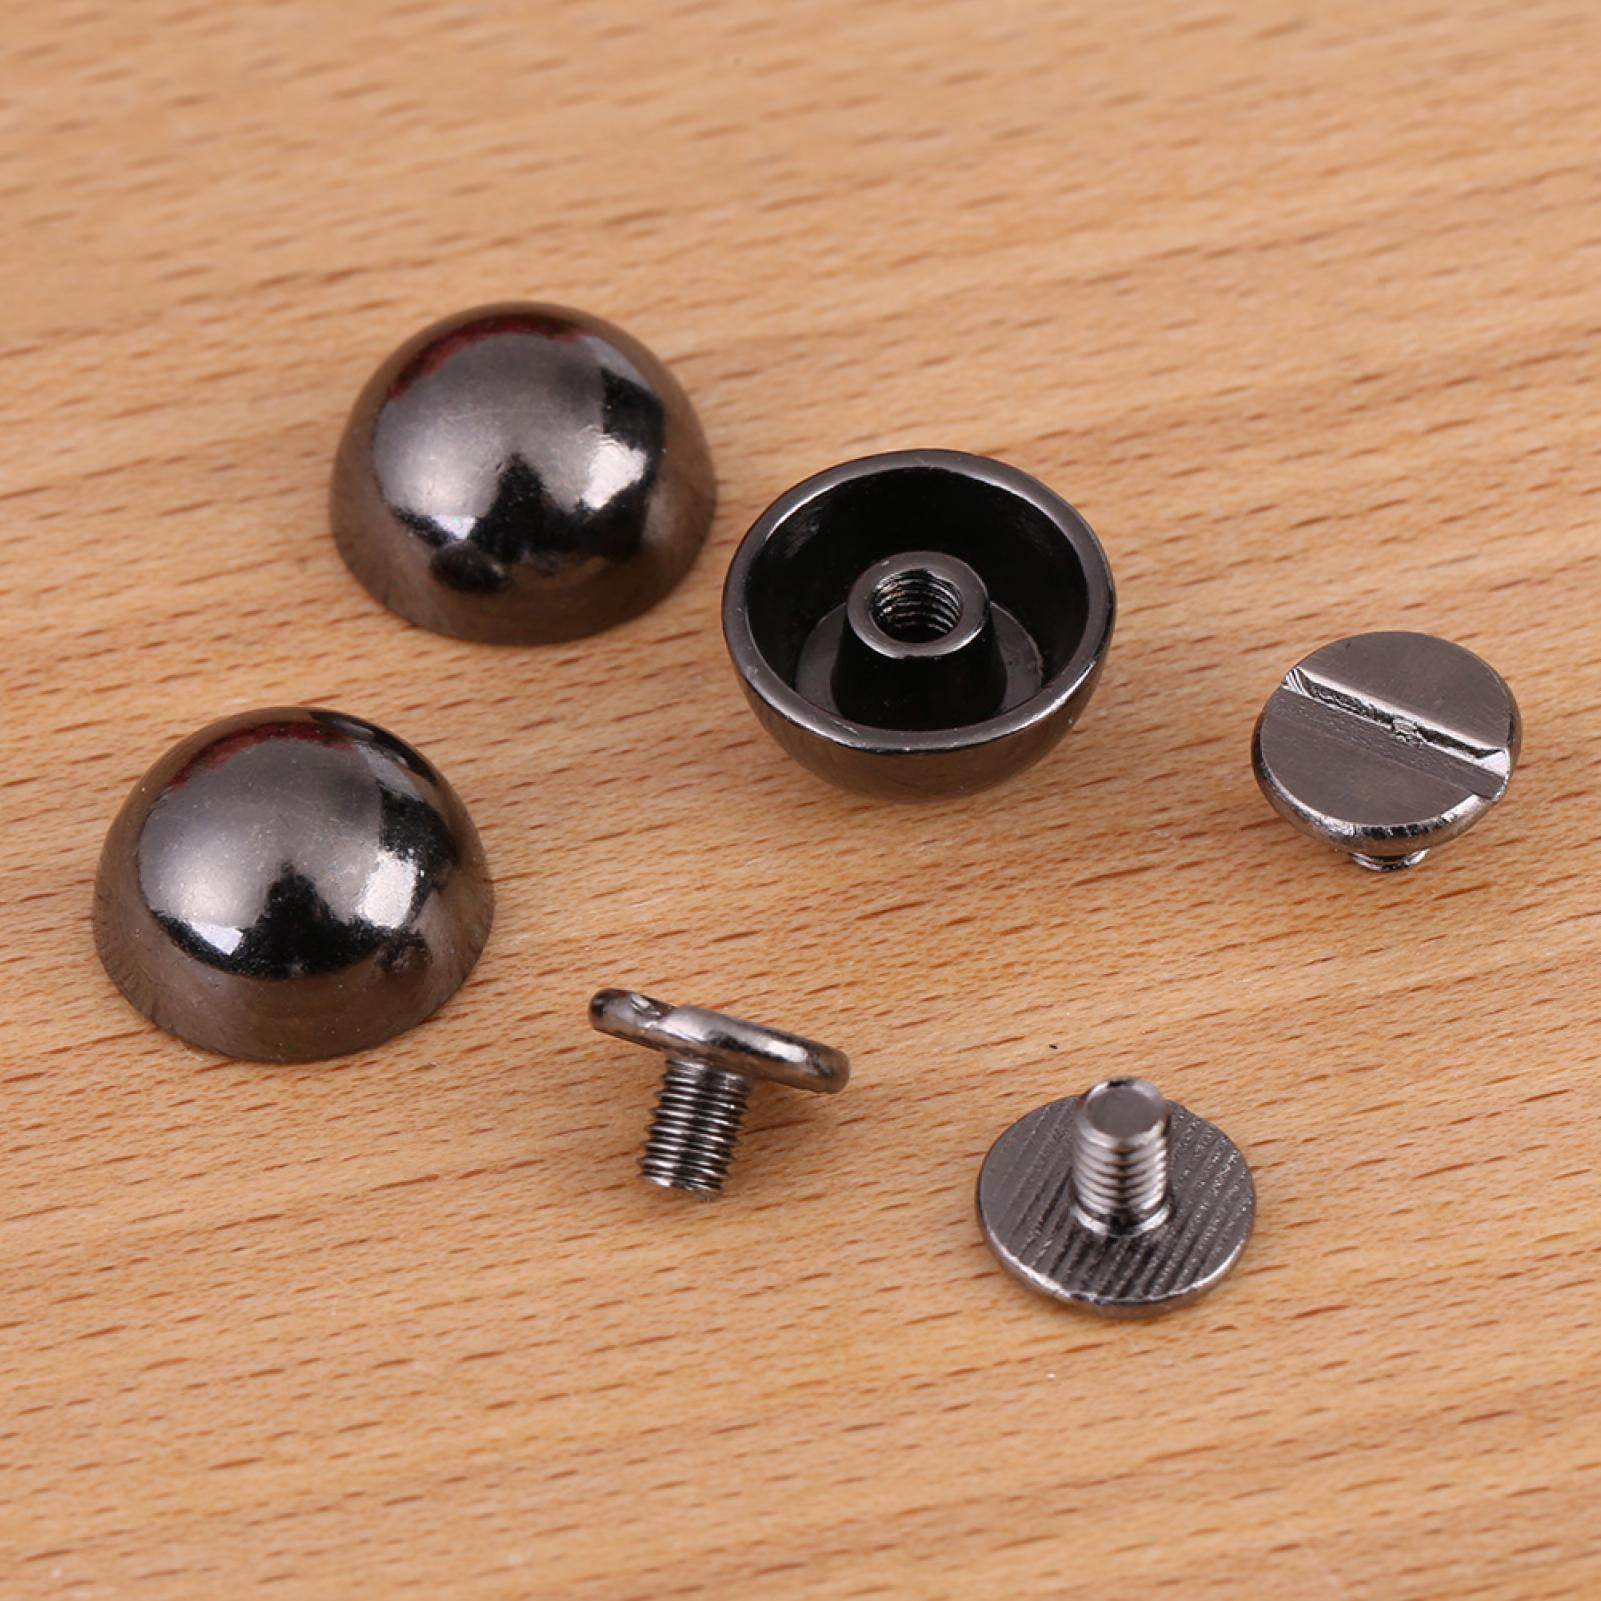 20mm Snap Poppers Prong Rings Press Studs Fastener For Arts Crafts Leather Belts 